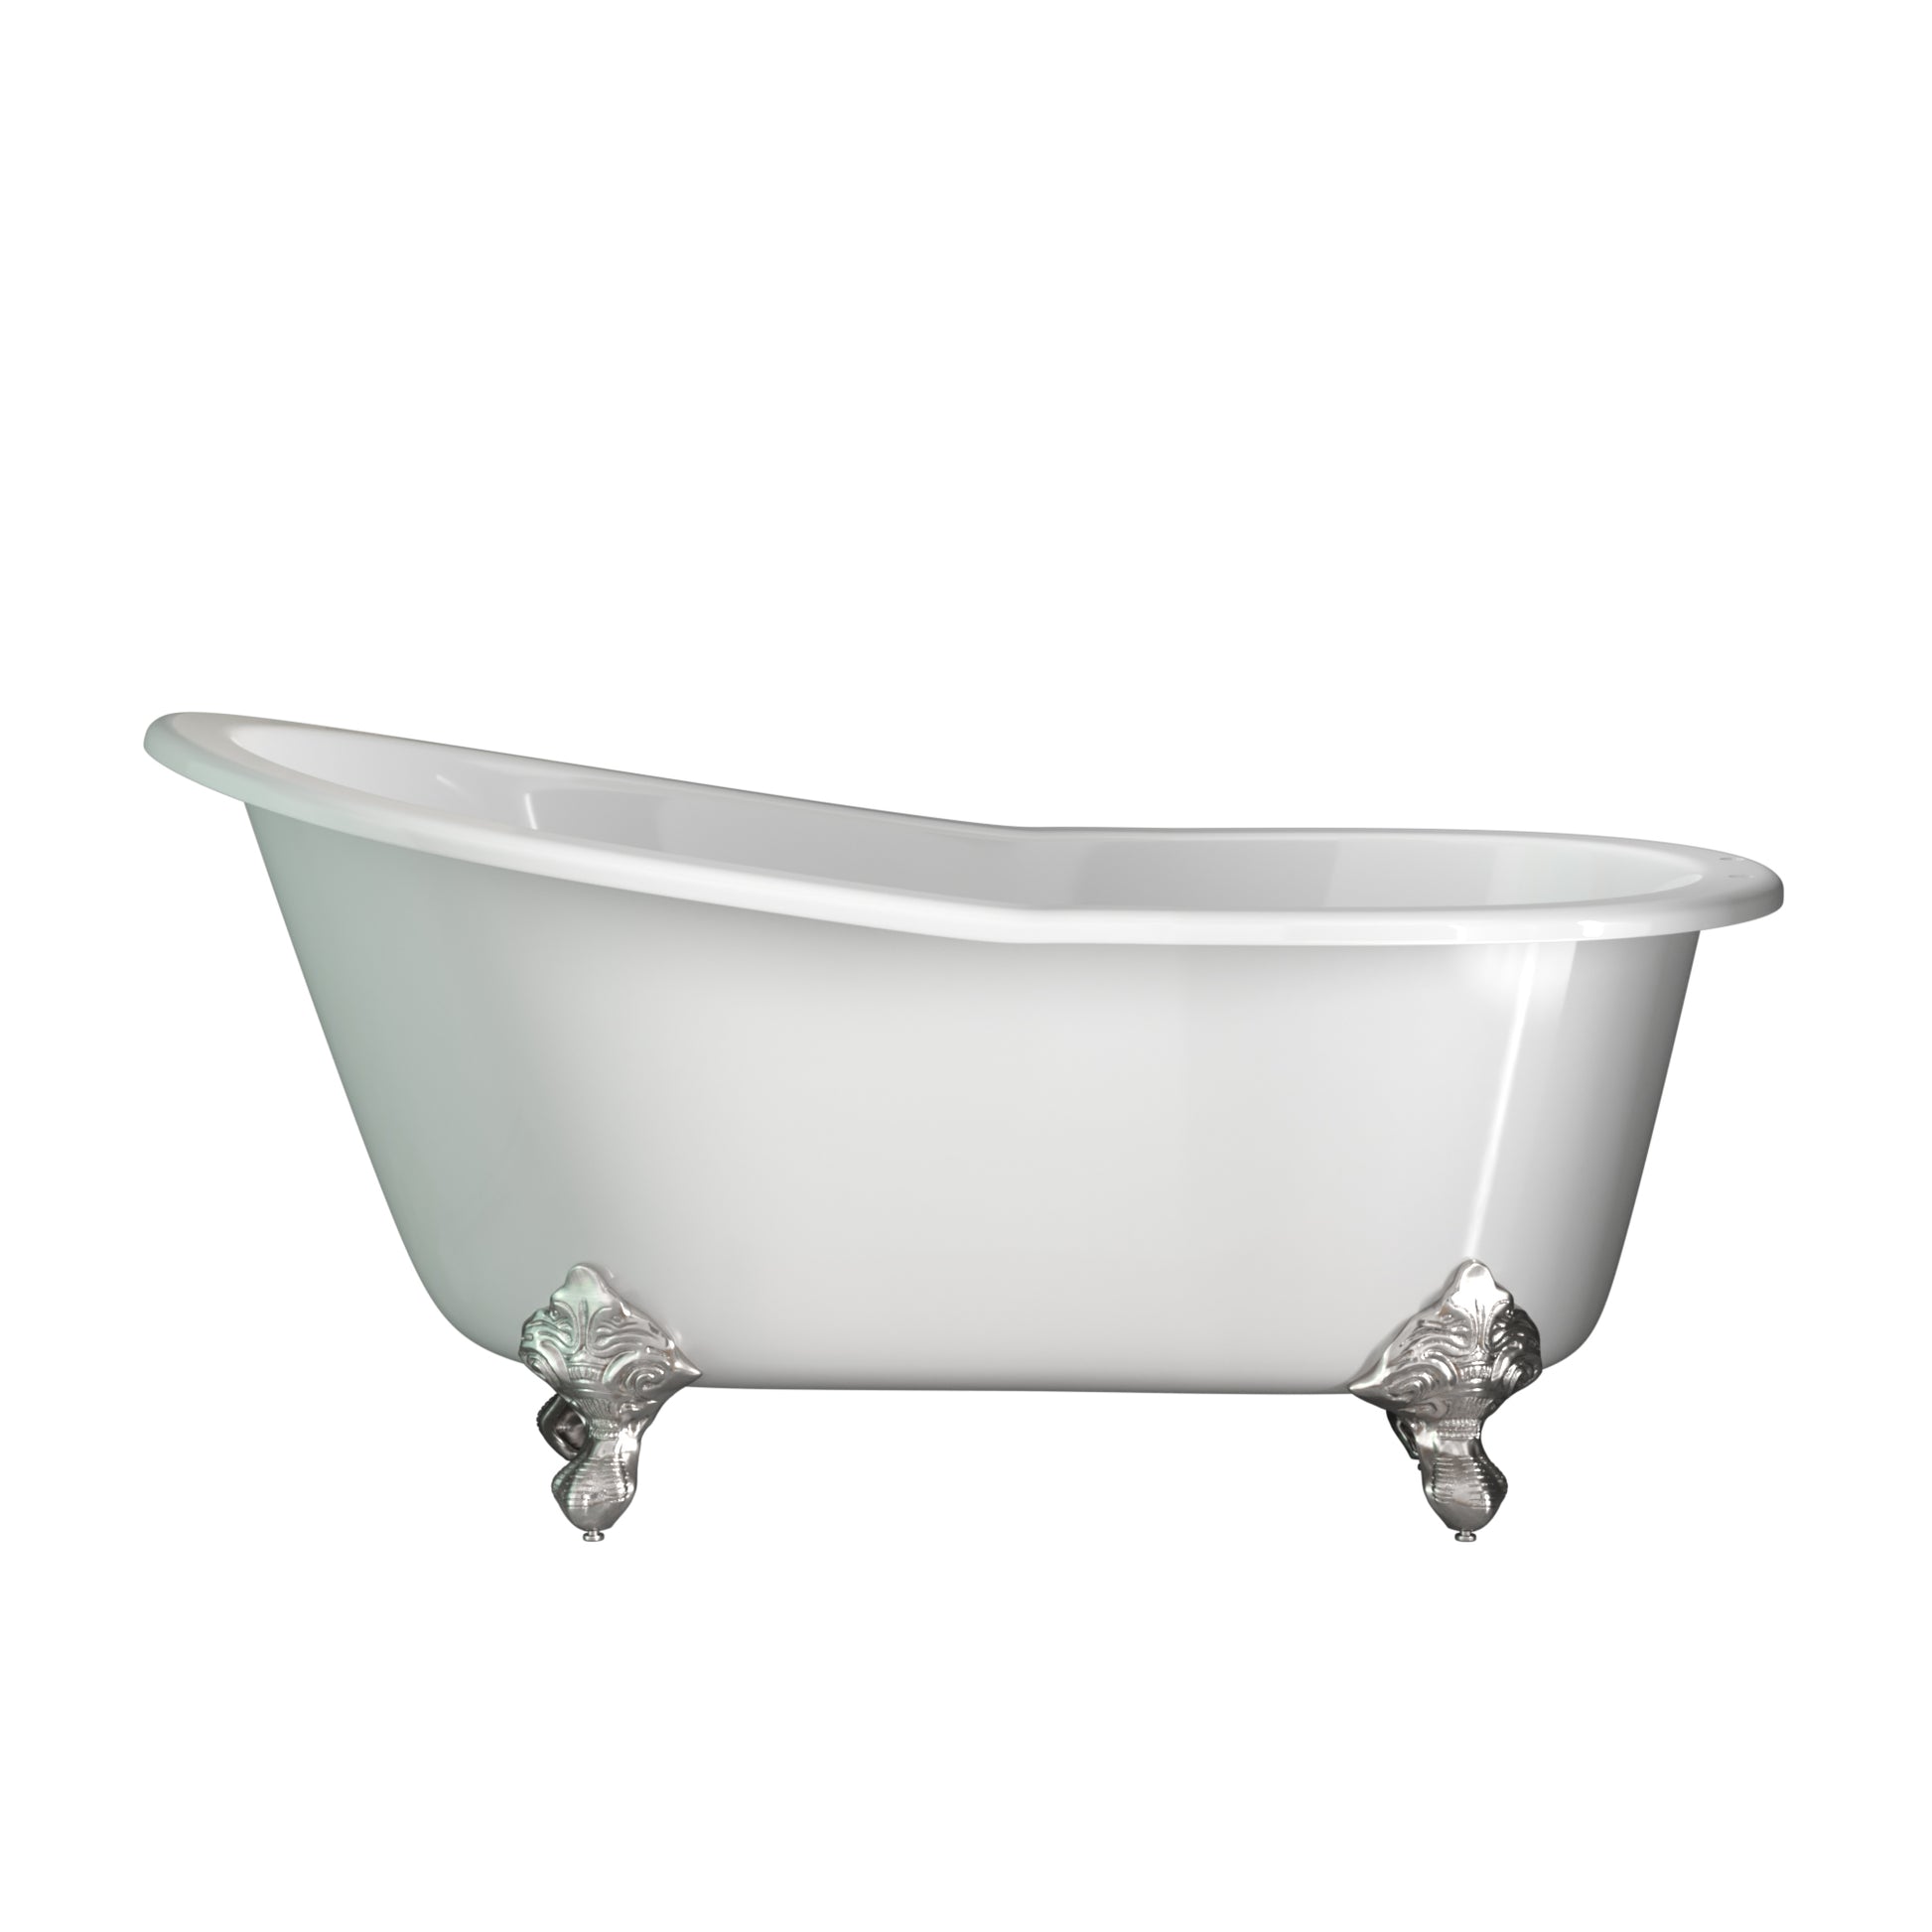 Cast Iron Slipper Clawfoot Tub 61" X 30" with 7" Deck Mount Faucet Drillings and Brushed Nickel Feet - ST61-DH-BN